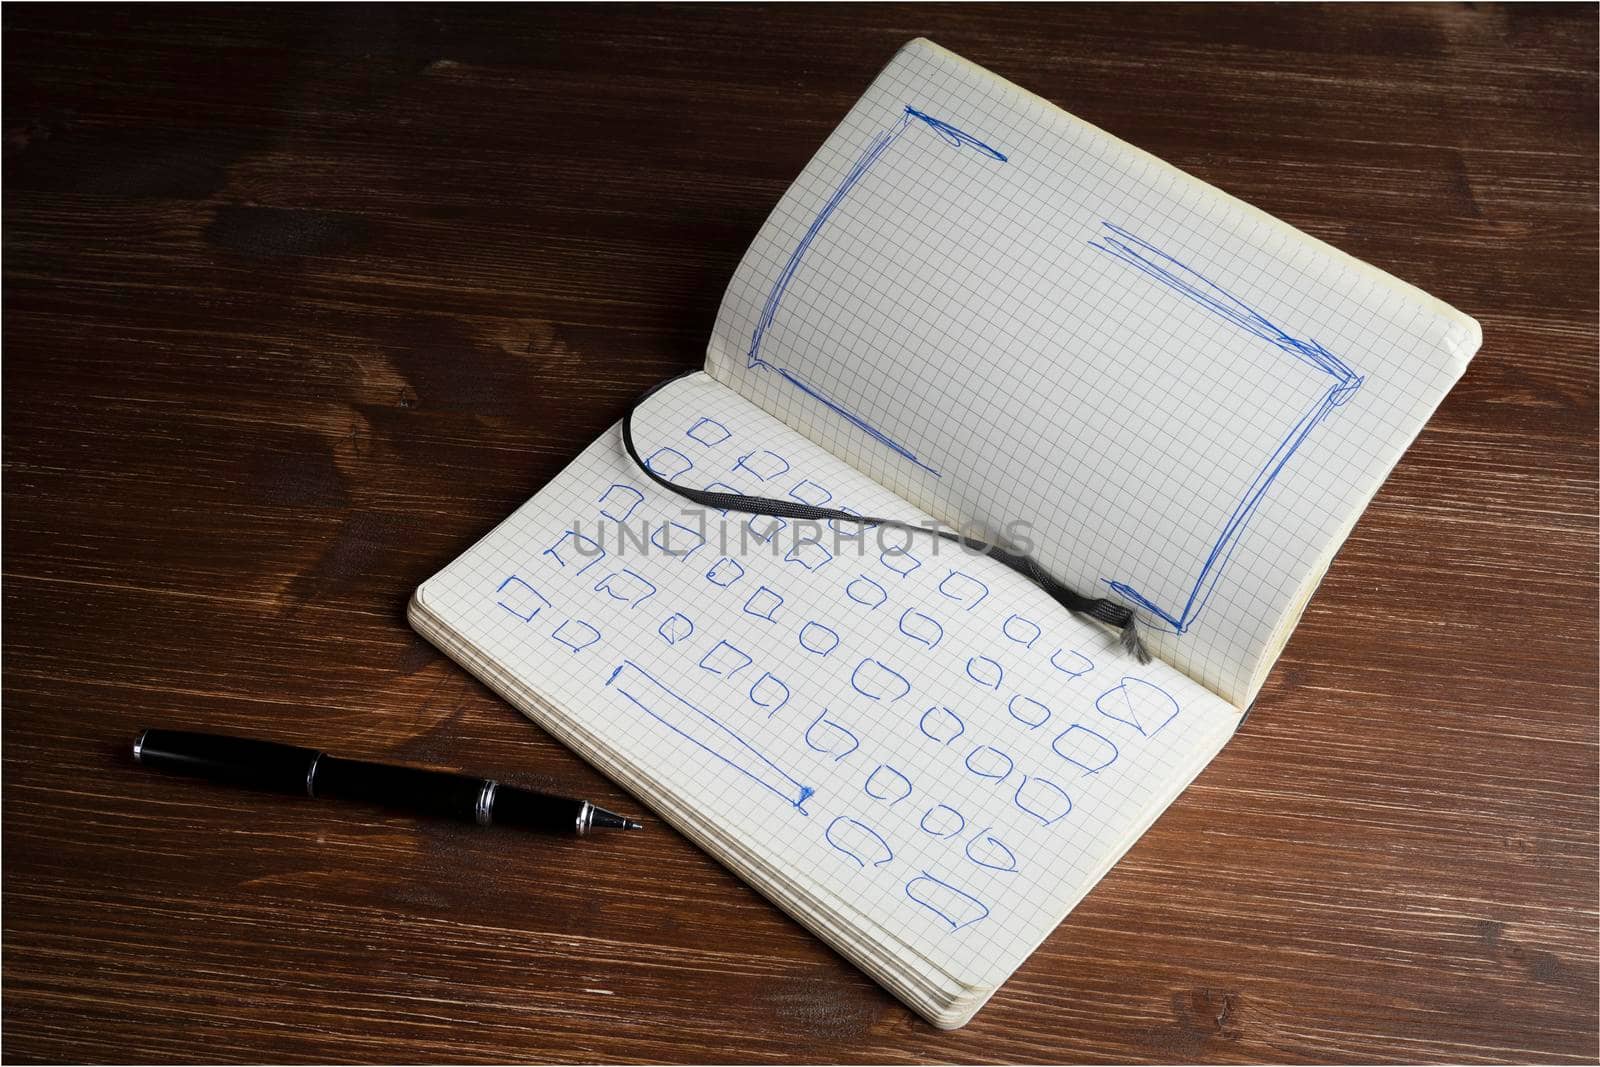 a notebook with the drawing of the keyboard and the screen of a notebook